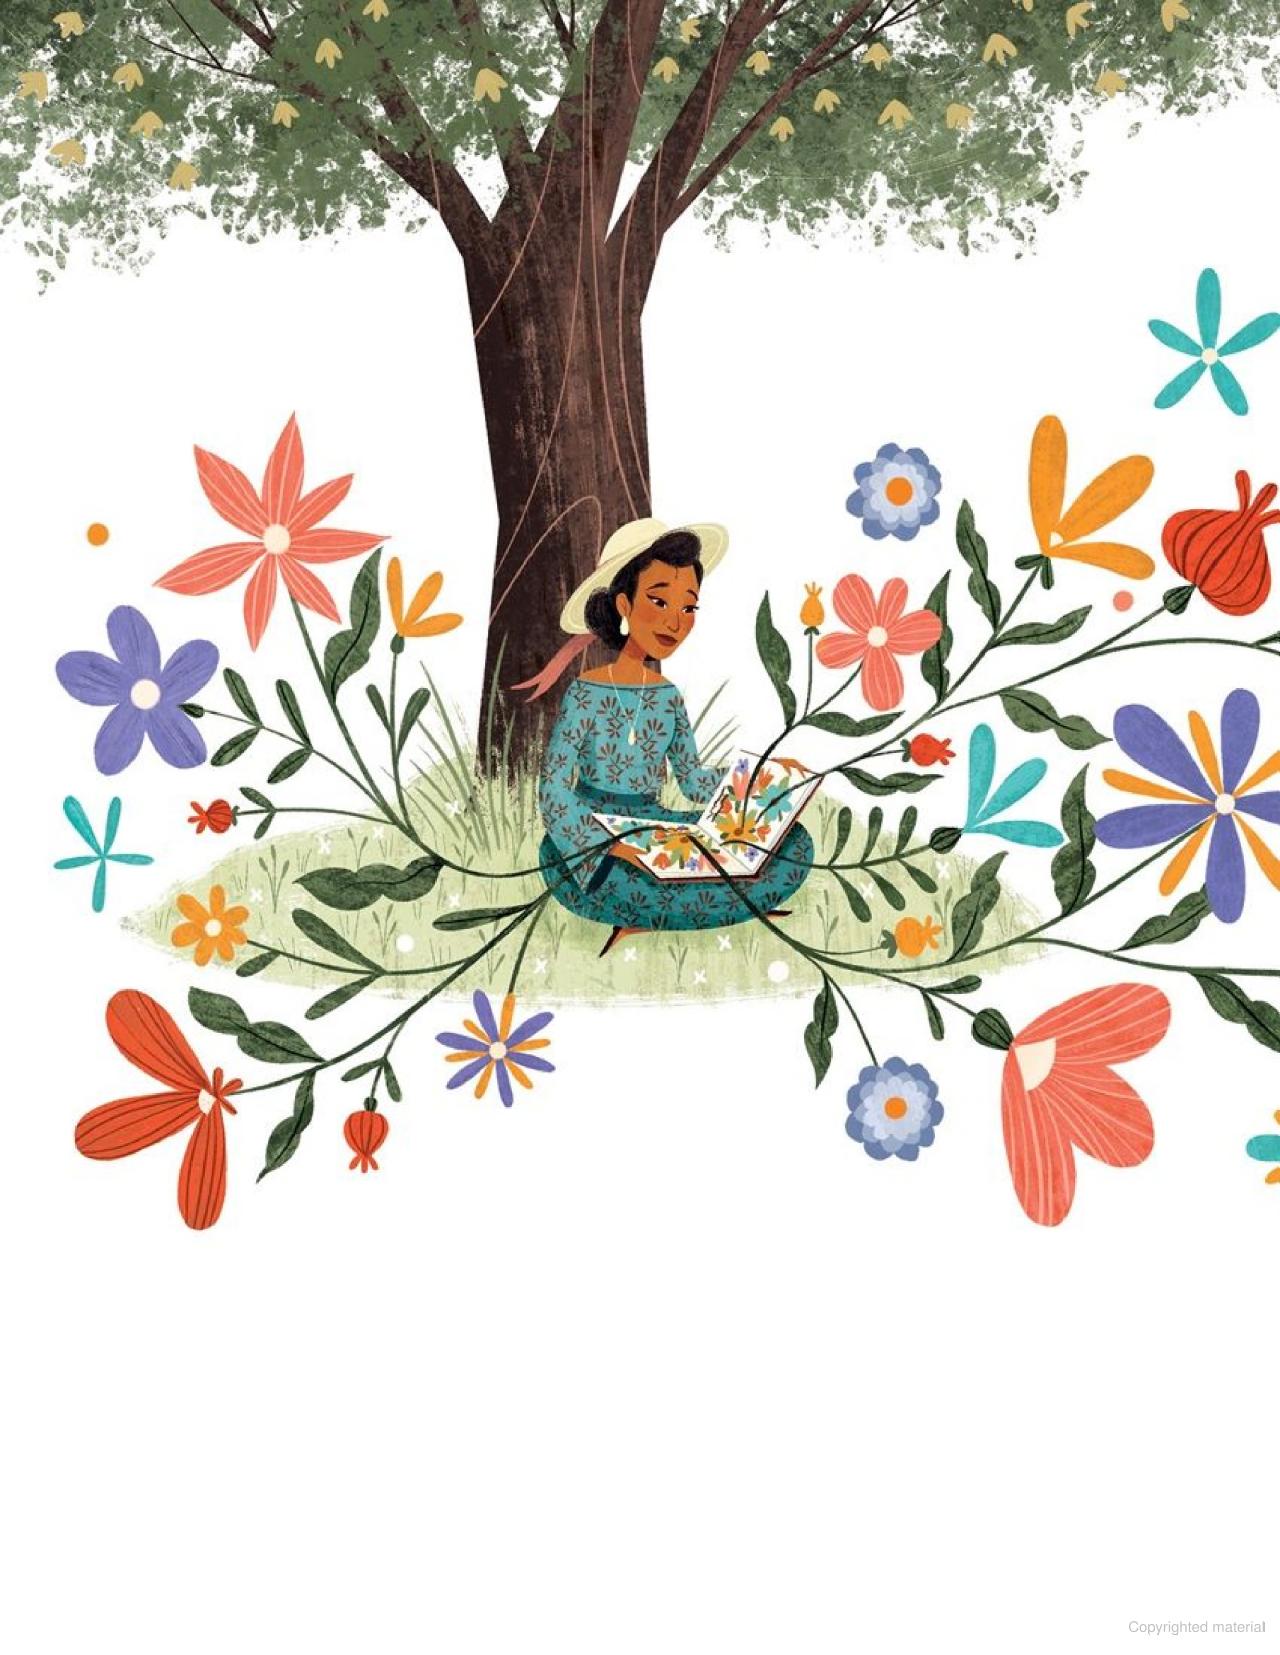 Planting Stories : The Life of Librarian and Storyteller Pura Belpre